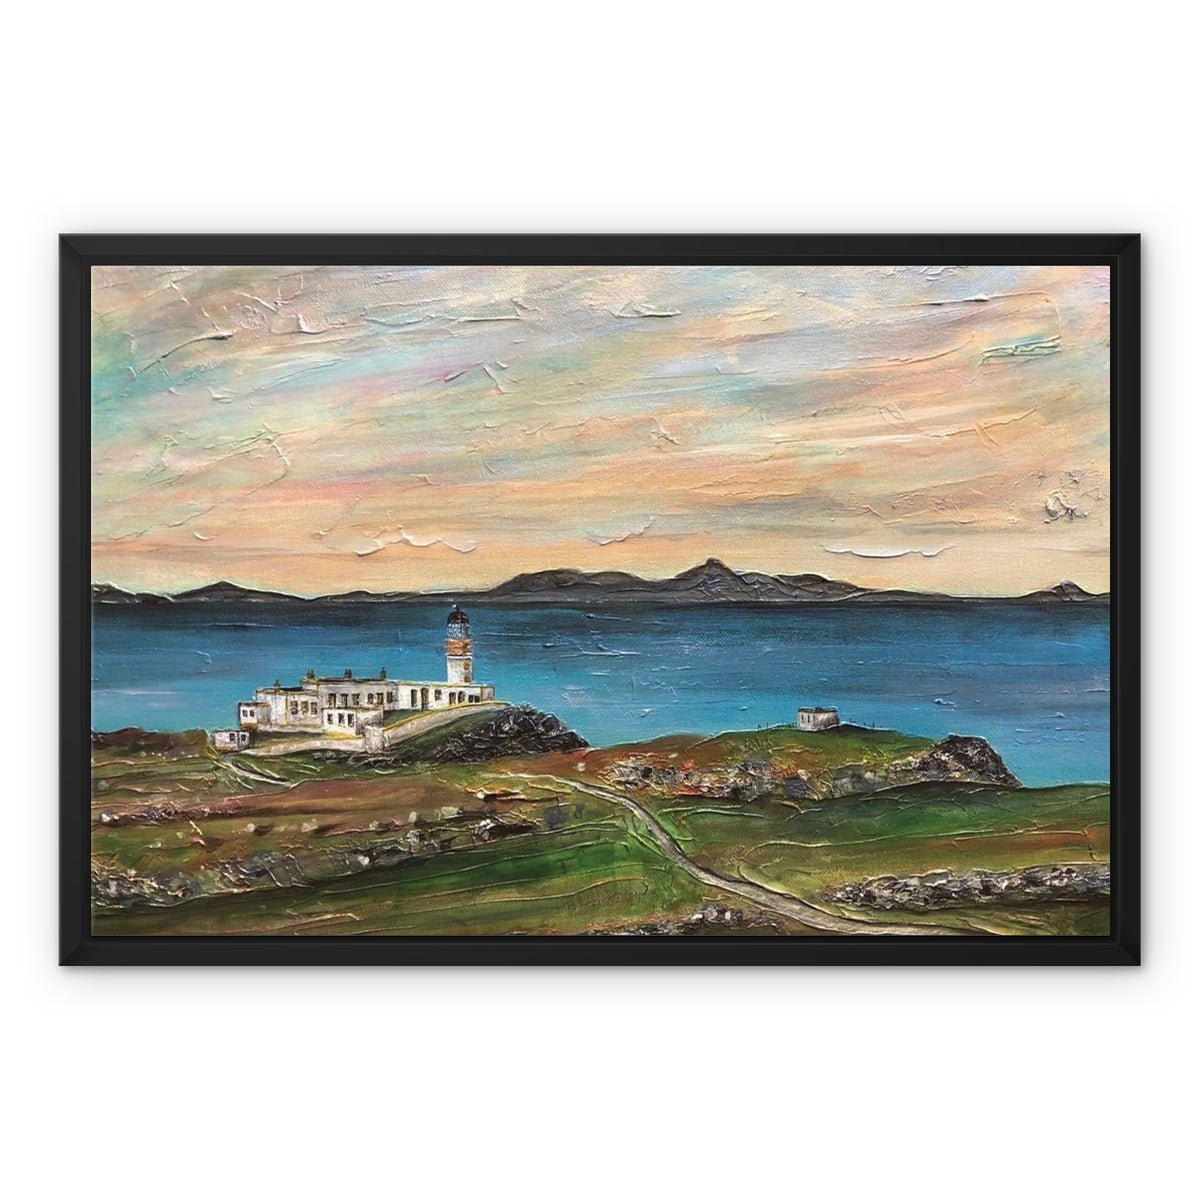 Neist Point Skye Painting | Framed Canvas From Scotland-Floating Framed Canvas Prints-Skye Art Gallery-24"x18"-Black Frame-Paintings, Prints, Homeware, Art Gifts From Scotland By Scottish Artist Kevin Hunter